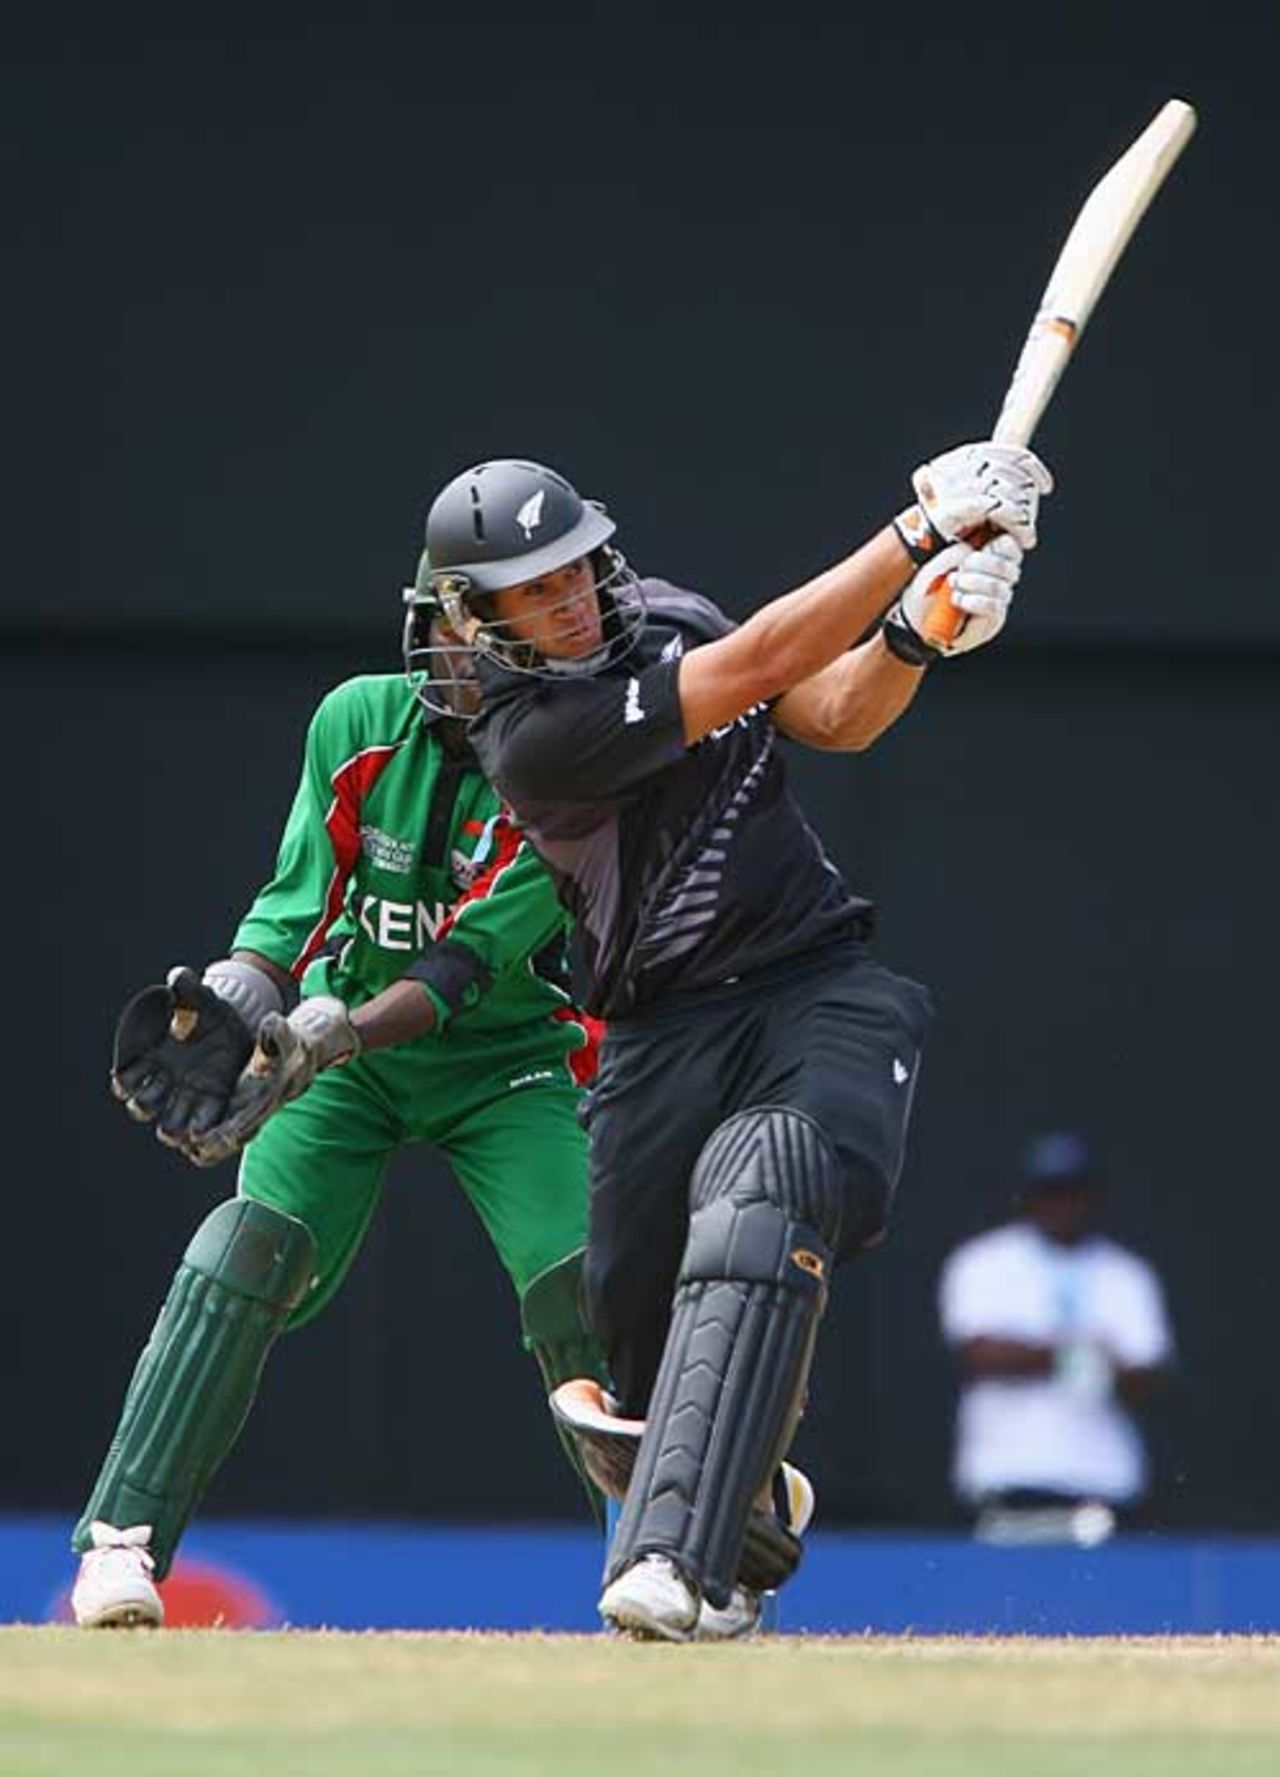 Ross Taylor opts for the leg side as he opens his World Cup account, Kenya v New Zealand, Group C, St Lucia, March 20, 2007